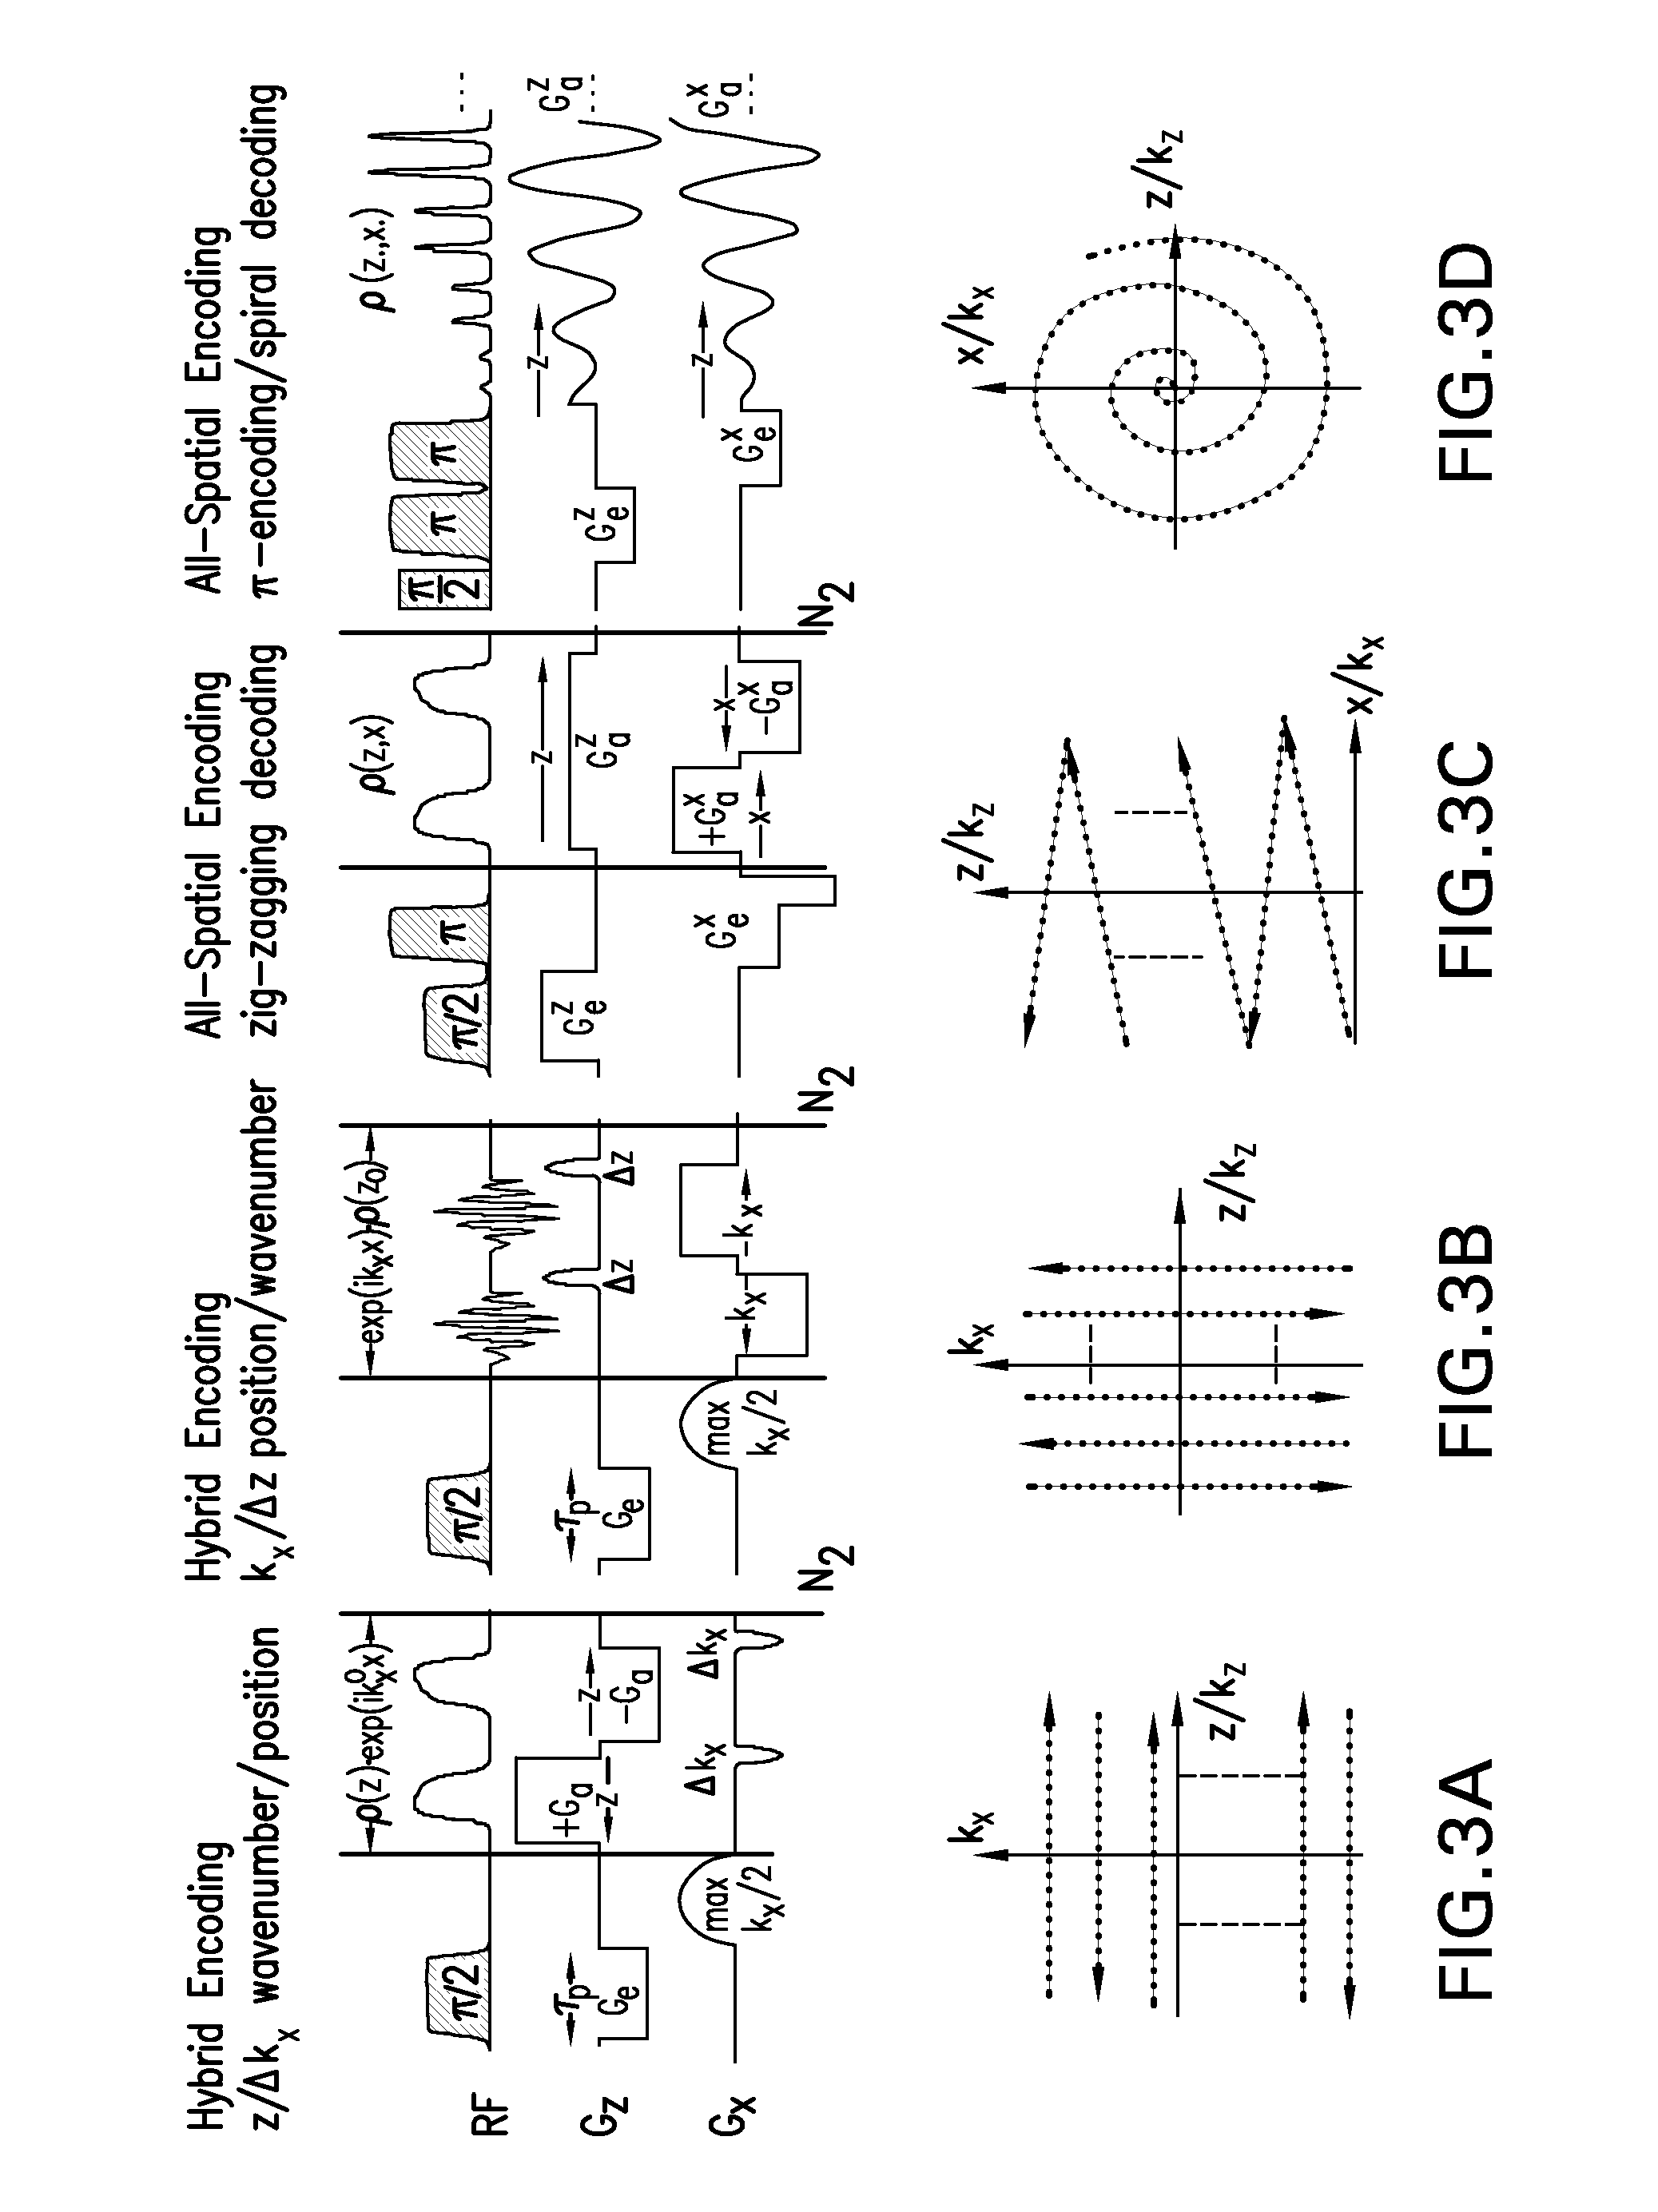 Method and apparatus for acquiring high resolution spectral data or high definition images in inhomogeneous environments